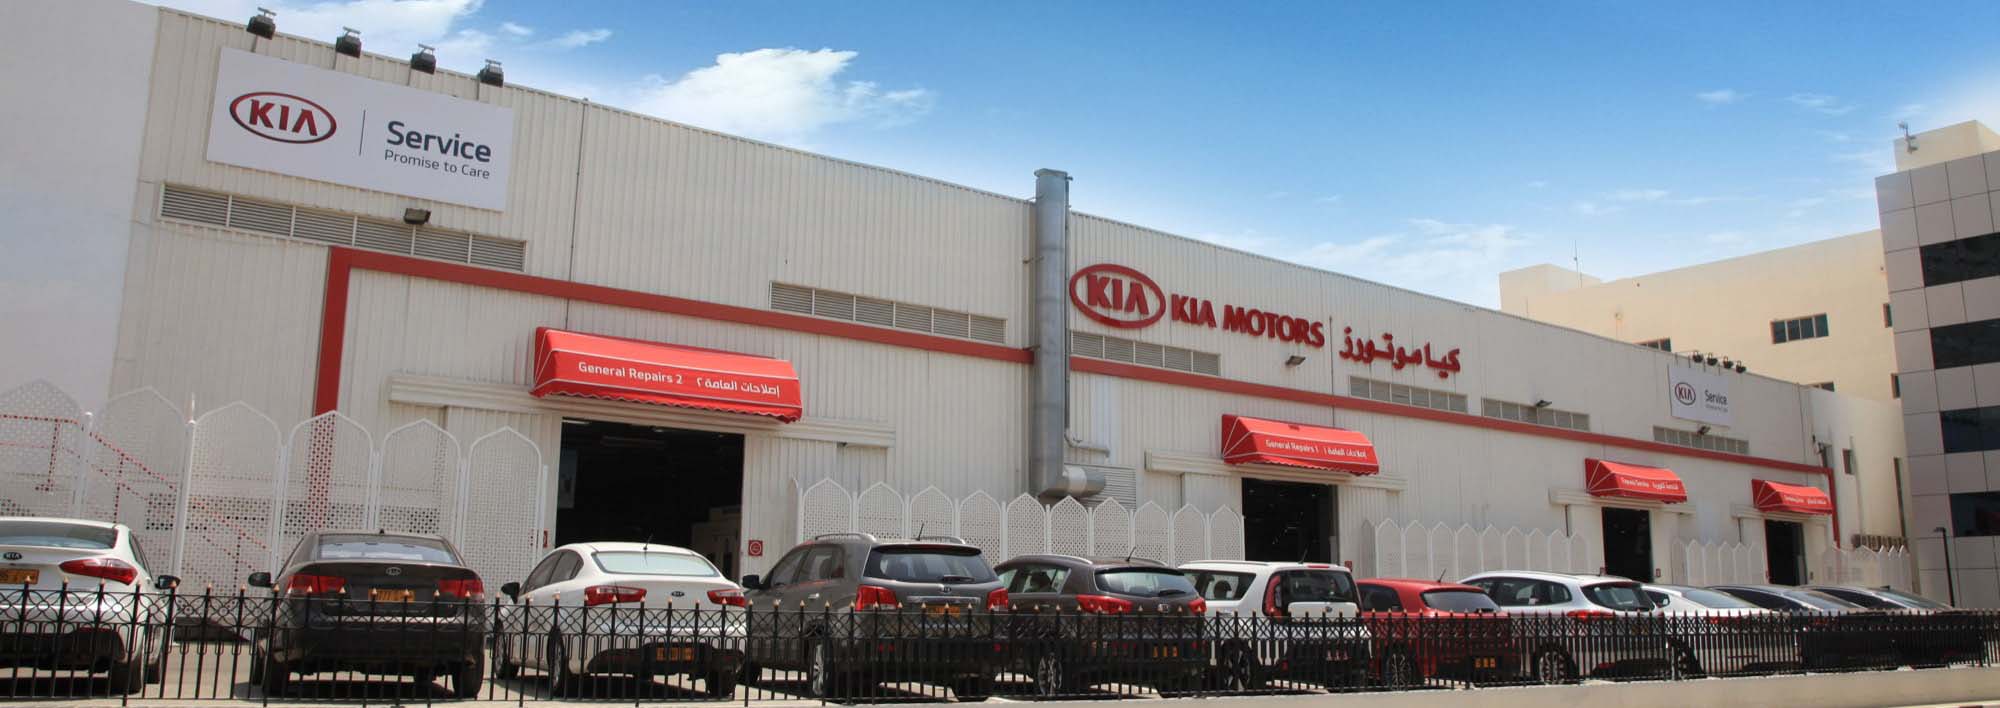 General repairs and Kia service centre outside view